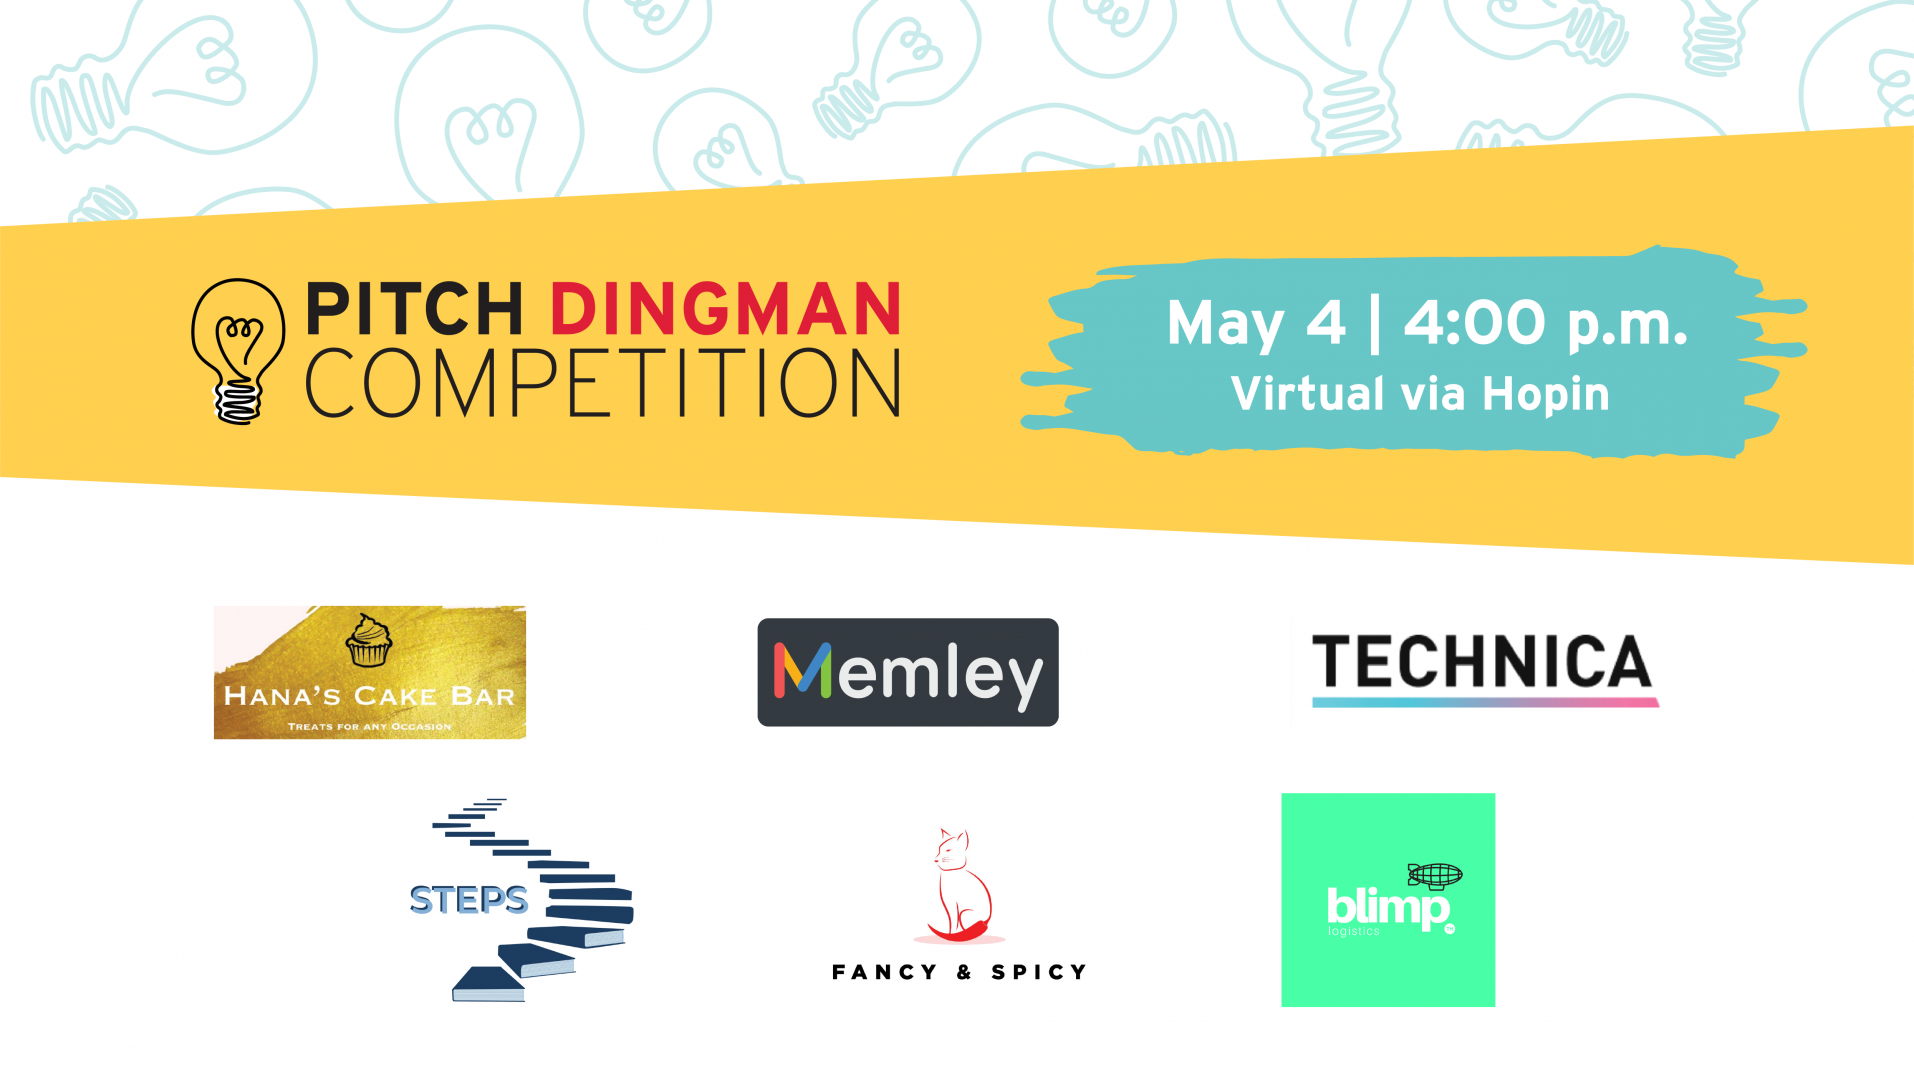 Six UMD Student Startups Named Finalists at Pitch Dingman Competition Semifinals